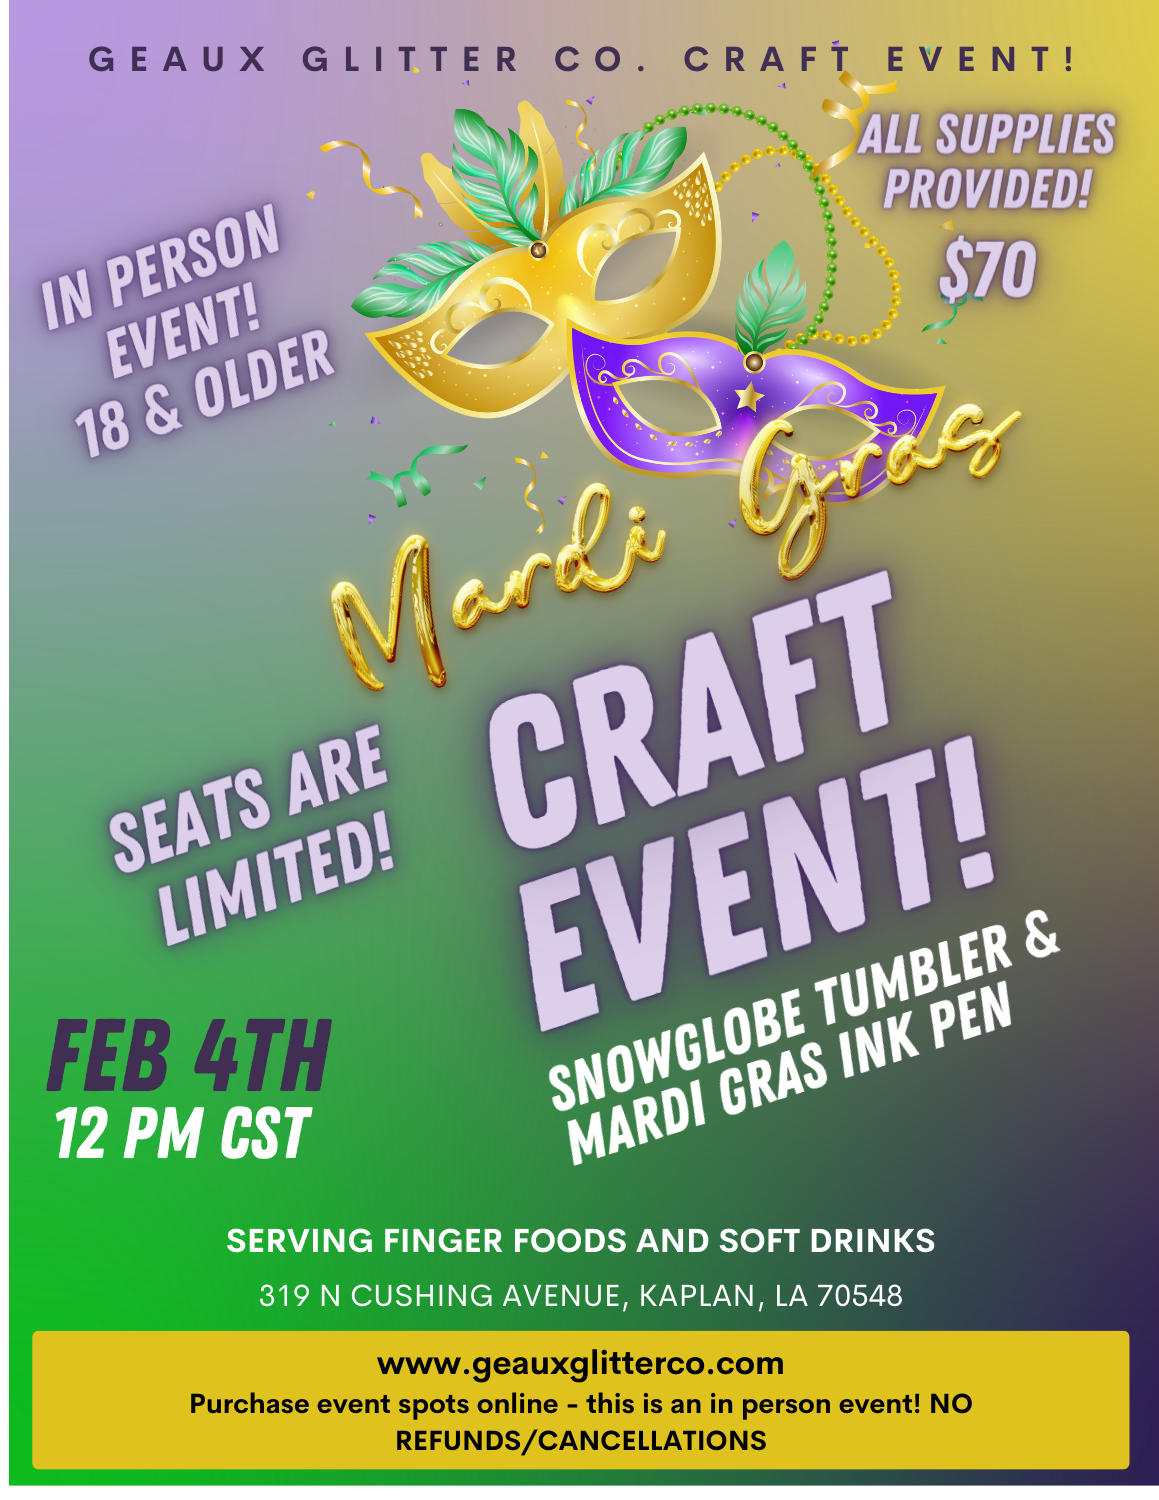 GEAUX GLITTER CO.  MARDI GRAS CRAFT EVENT! 2/4 @ 12:00 PM CST - IN PERSON ONLY! SEATS ARE LIMITED!